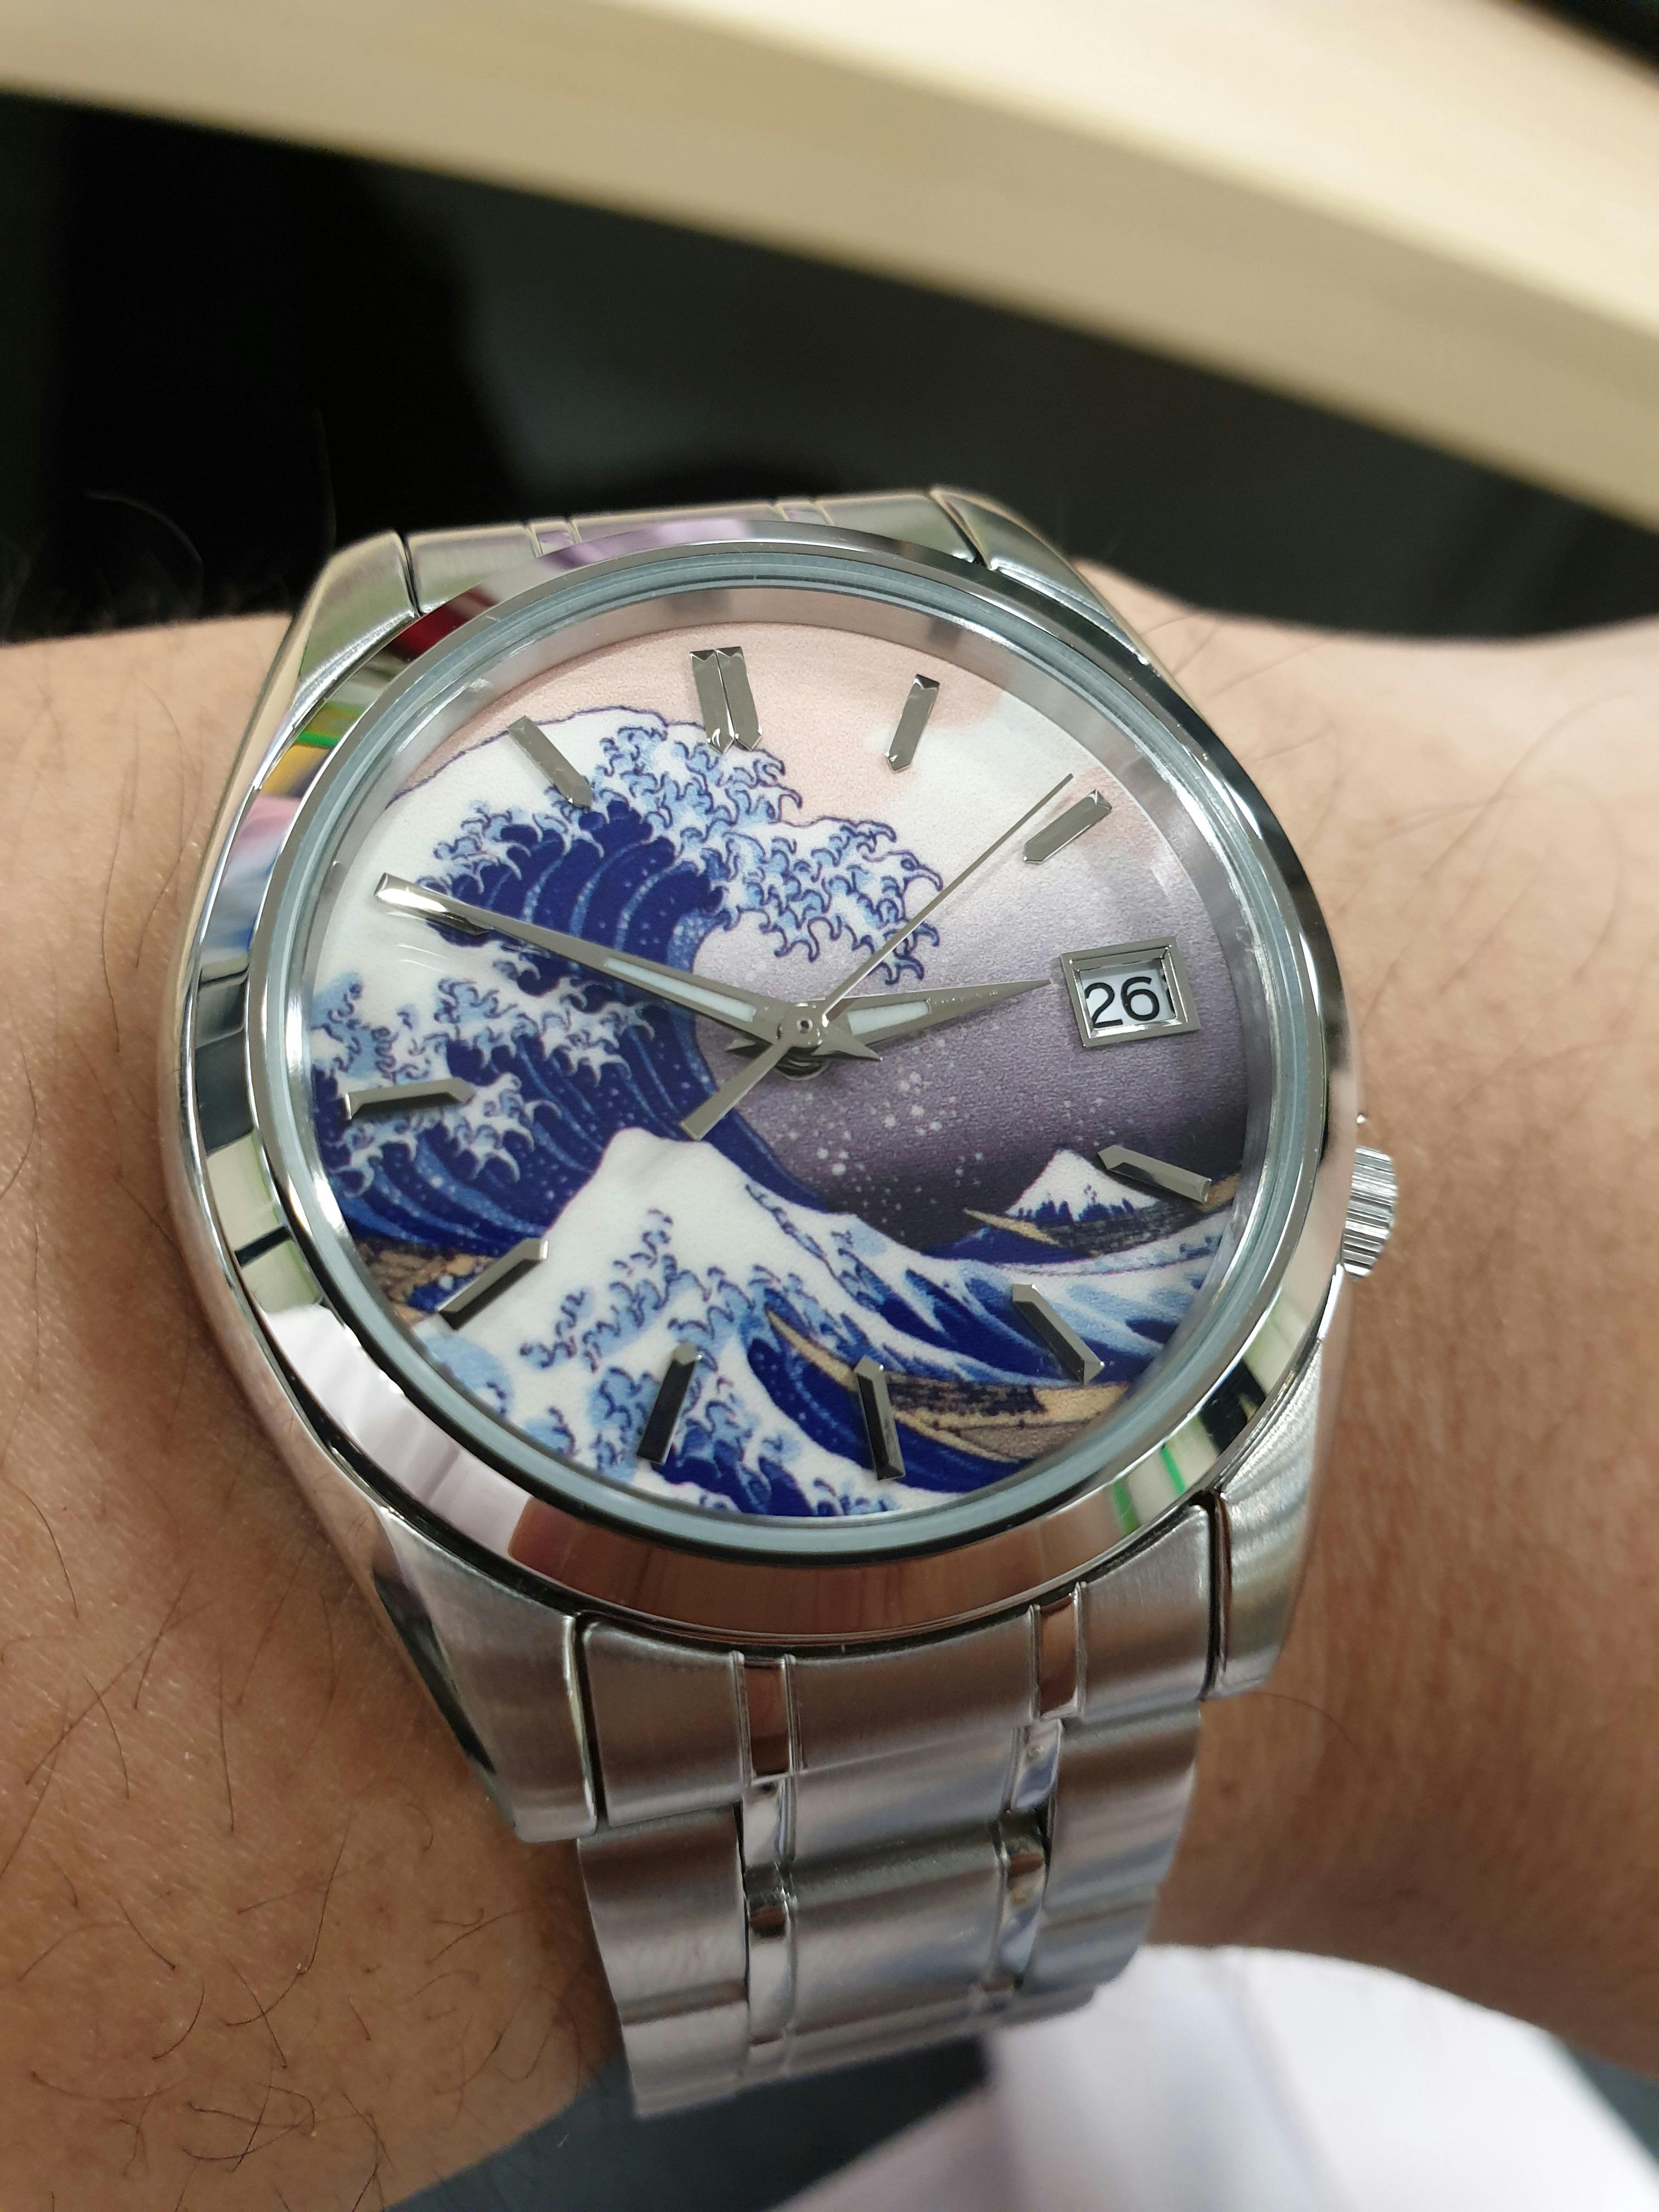 The Great Wave off Kanagawa Dial (Date) - SEIKO Mod Part - Lucius Atelier